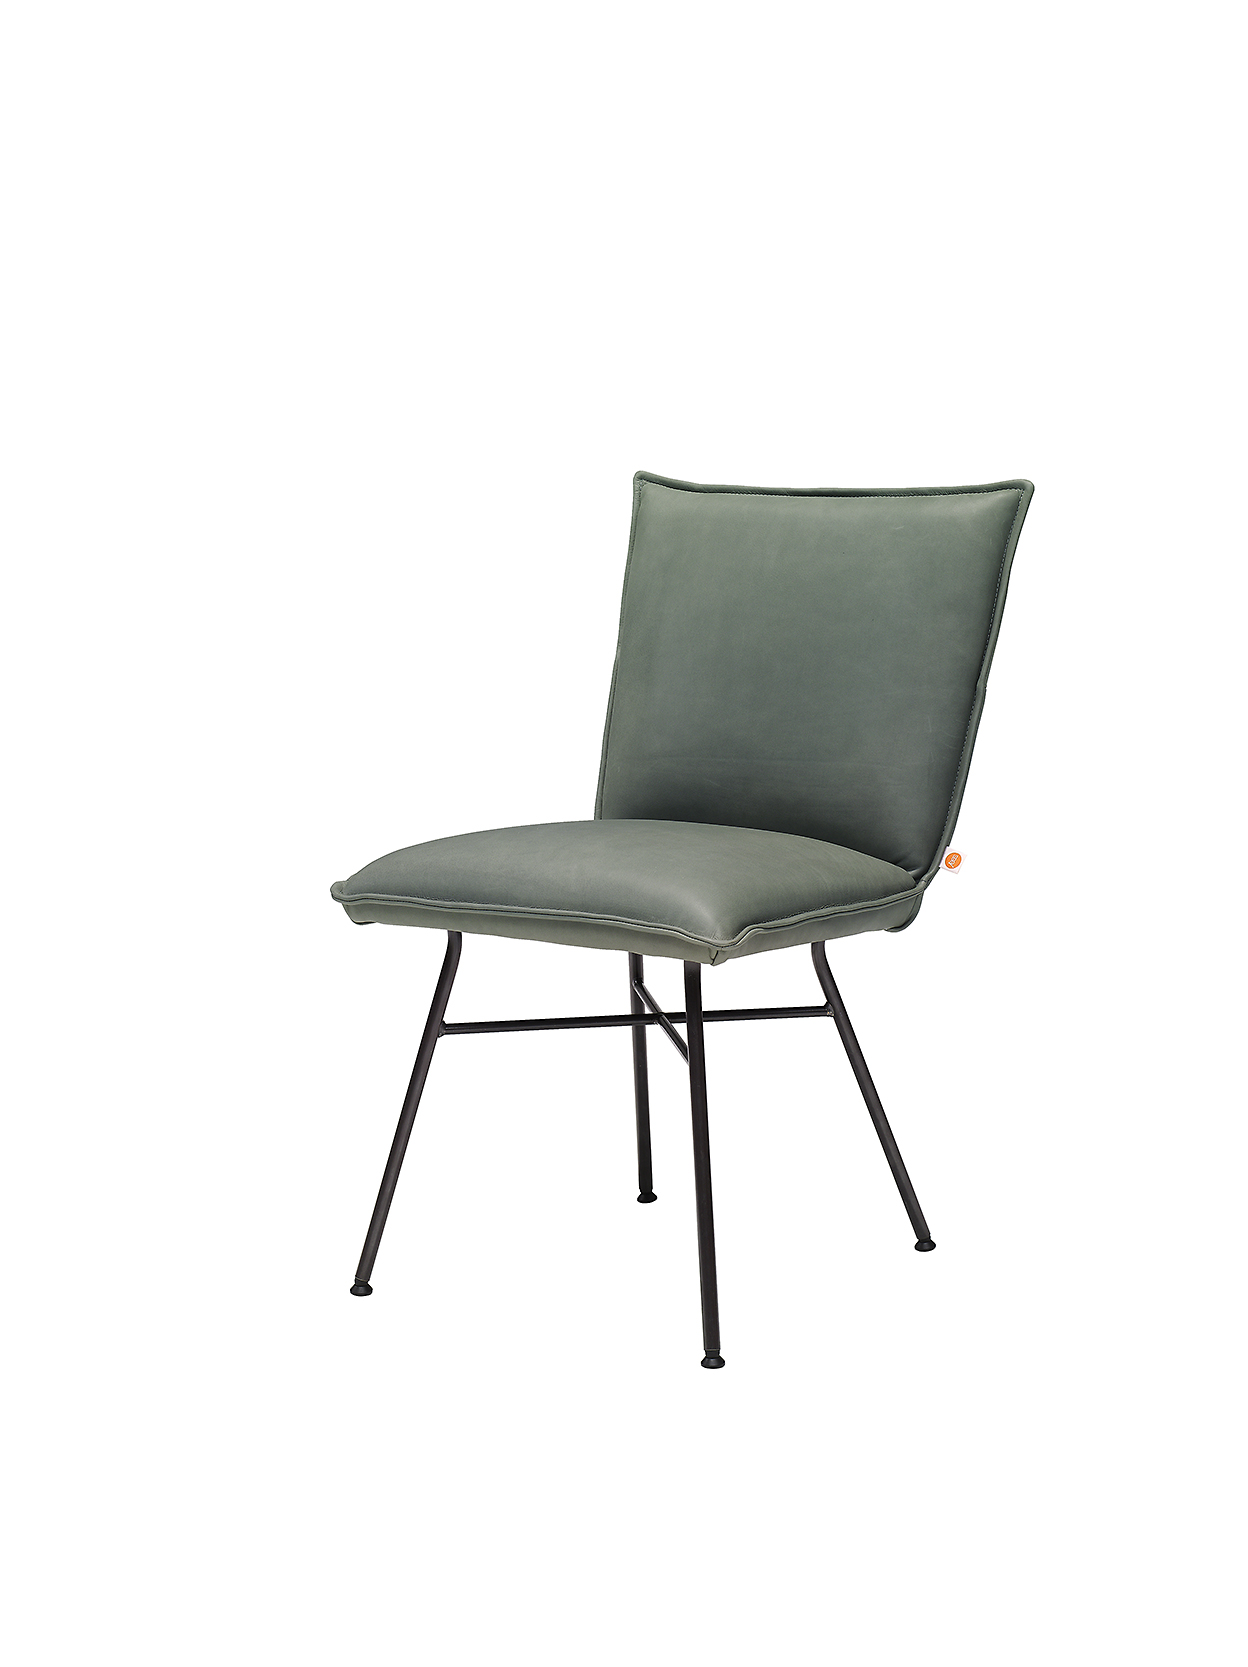 Sanne Chair Without Arm Sadie Olive Pers LR ZS 8720153744621